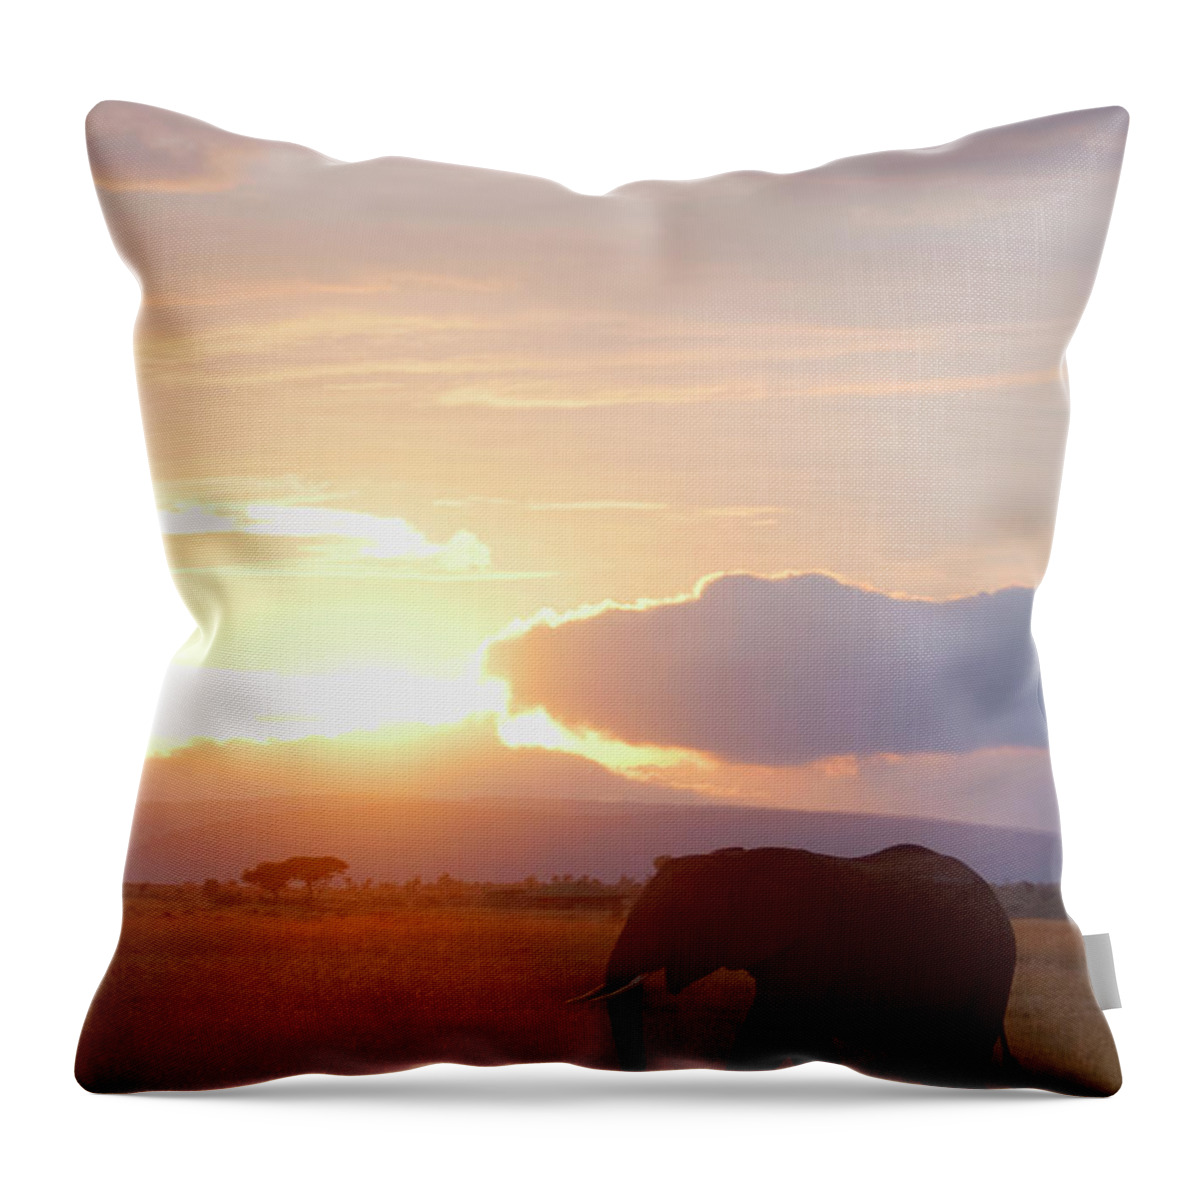 Scenics Throw Pillow featuring the photograph Elephant Walking At Sunrise by Grant Faint